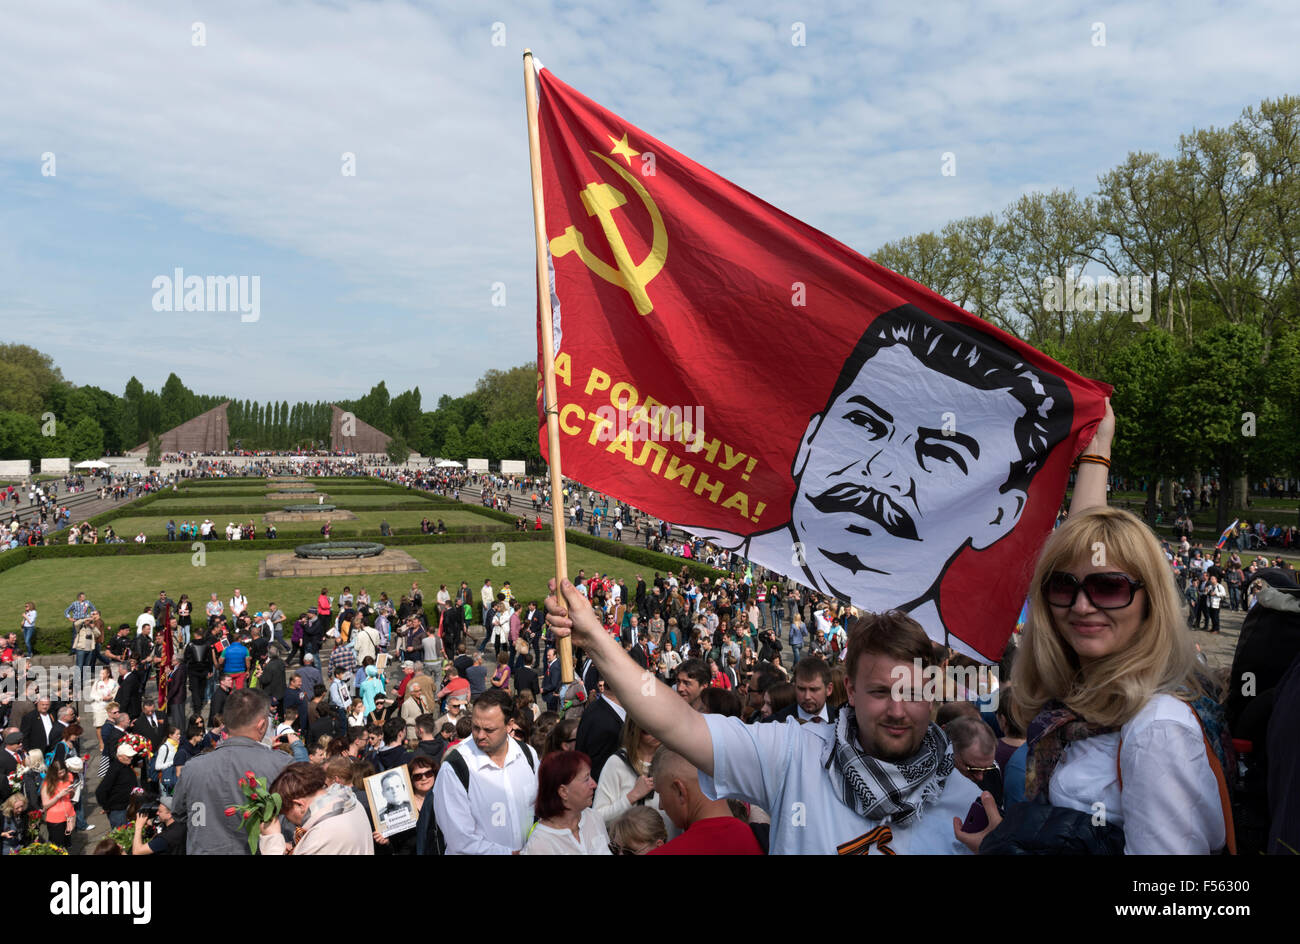 '09.05.2015, Berlin, Berlin, Germany - Soviet War Memorial Treptow, the 70th anniversary of the end of World War II that 9 May is considered in Russia as Victory Day over Nazi Germany, banner with the slogan of the Second World War: ''For the Motherland, for Stalin!''. EBS150509D504CAROEX.JPG - NOT for SALE in G E R M A N Y, A U S T R I A, S W I T Z E R L A N D [MODEL RELEASE: NO, PROPERTY RELEASE: NO (c) caro photo agency / Schulz, http://www.caro-images.pl, info@carofoto.pl - In case of using the picture for non-journalistic purposes, please contact the agency - the picture is subject to roy Stock Photo